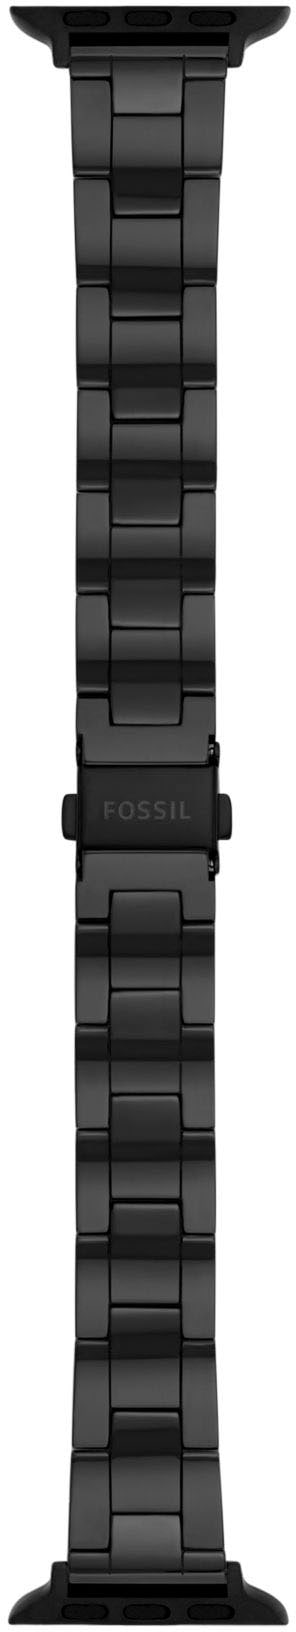 Fossil Smartwatch-Armband »Apple Strap, S380013«, ideal auch als